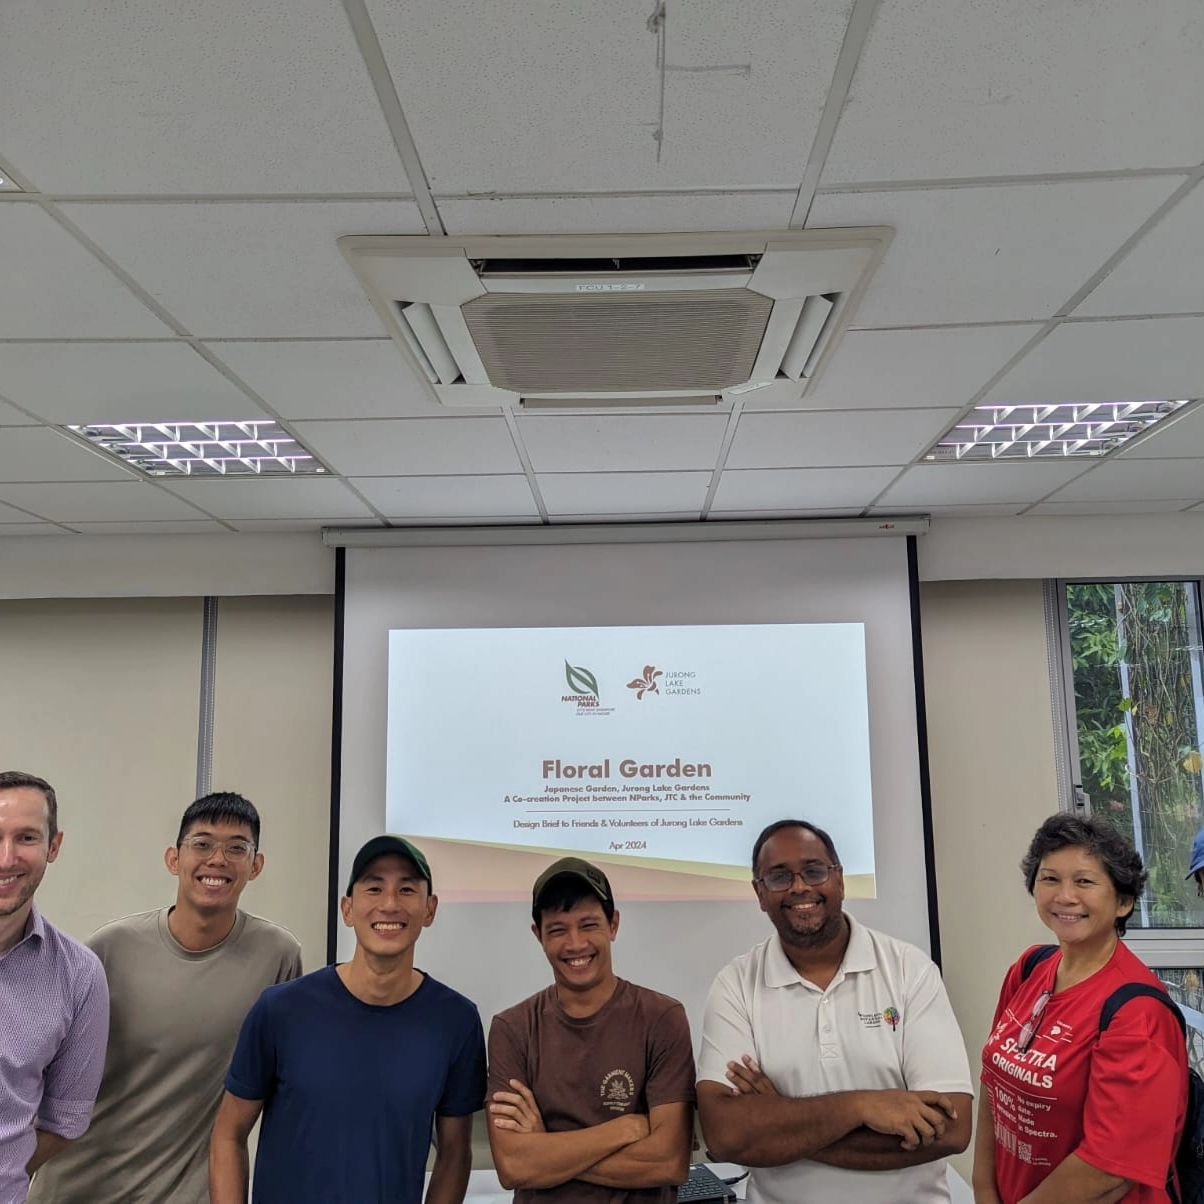 It's been a real privilege to be part of a public design team to contribute to Jurong Lake Gardens new Japanese Floral Garden alongside industry friends like @mapletree7296 Ganesh@woodlandsbotanicalgarden and justyn . We went through a crash course b